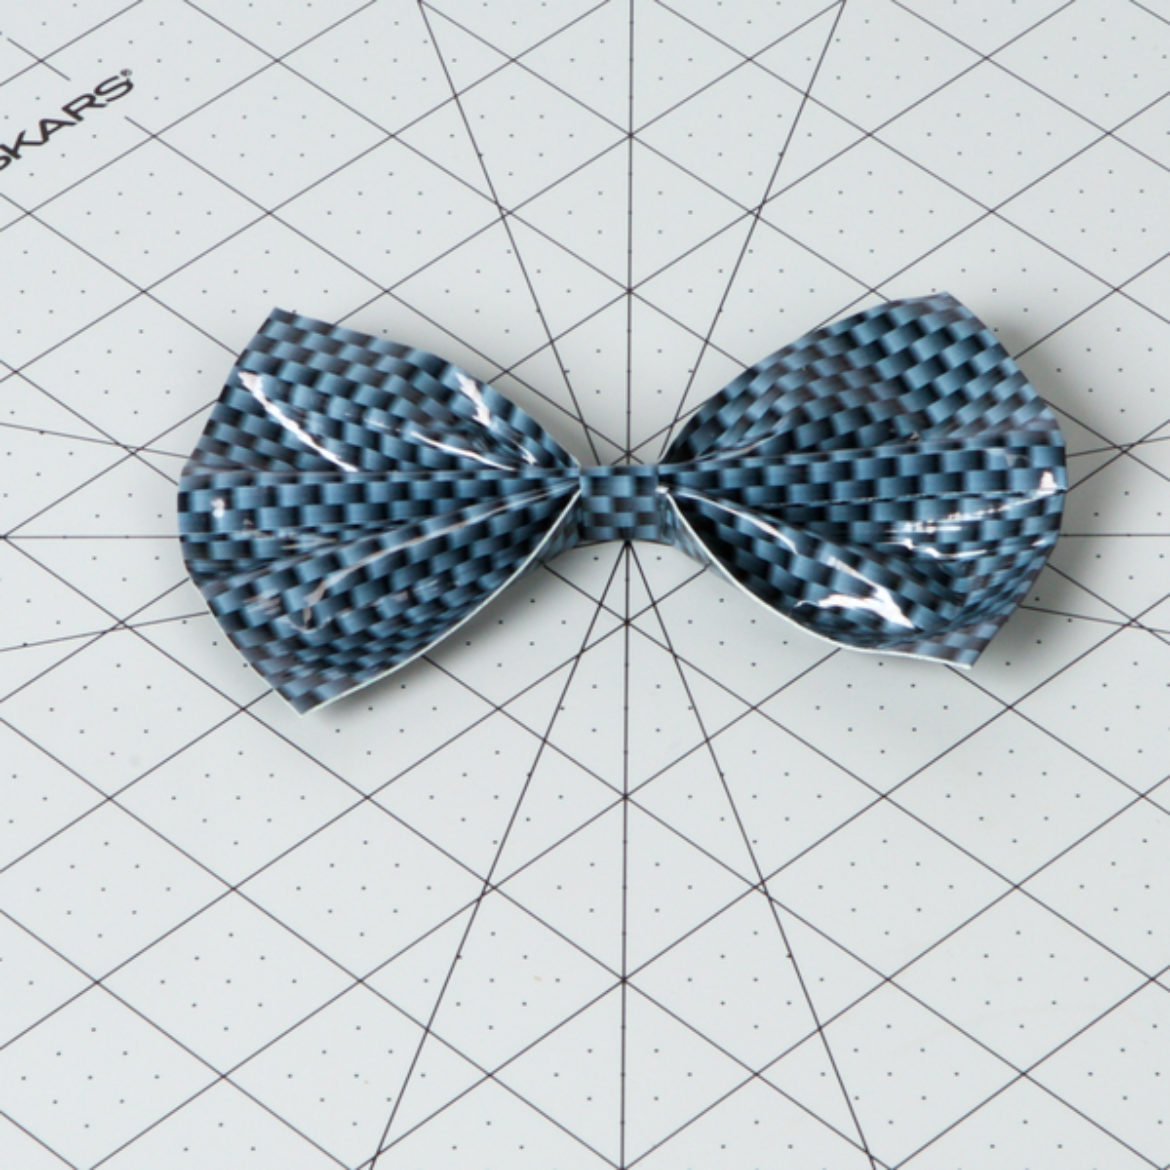 Duct Tape fabric folded into a bow tie shape